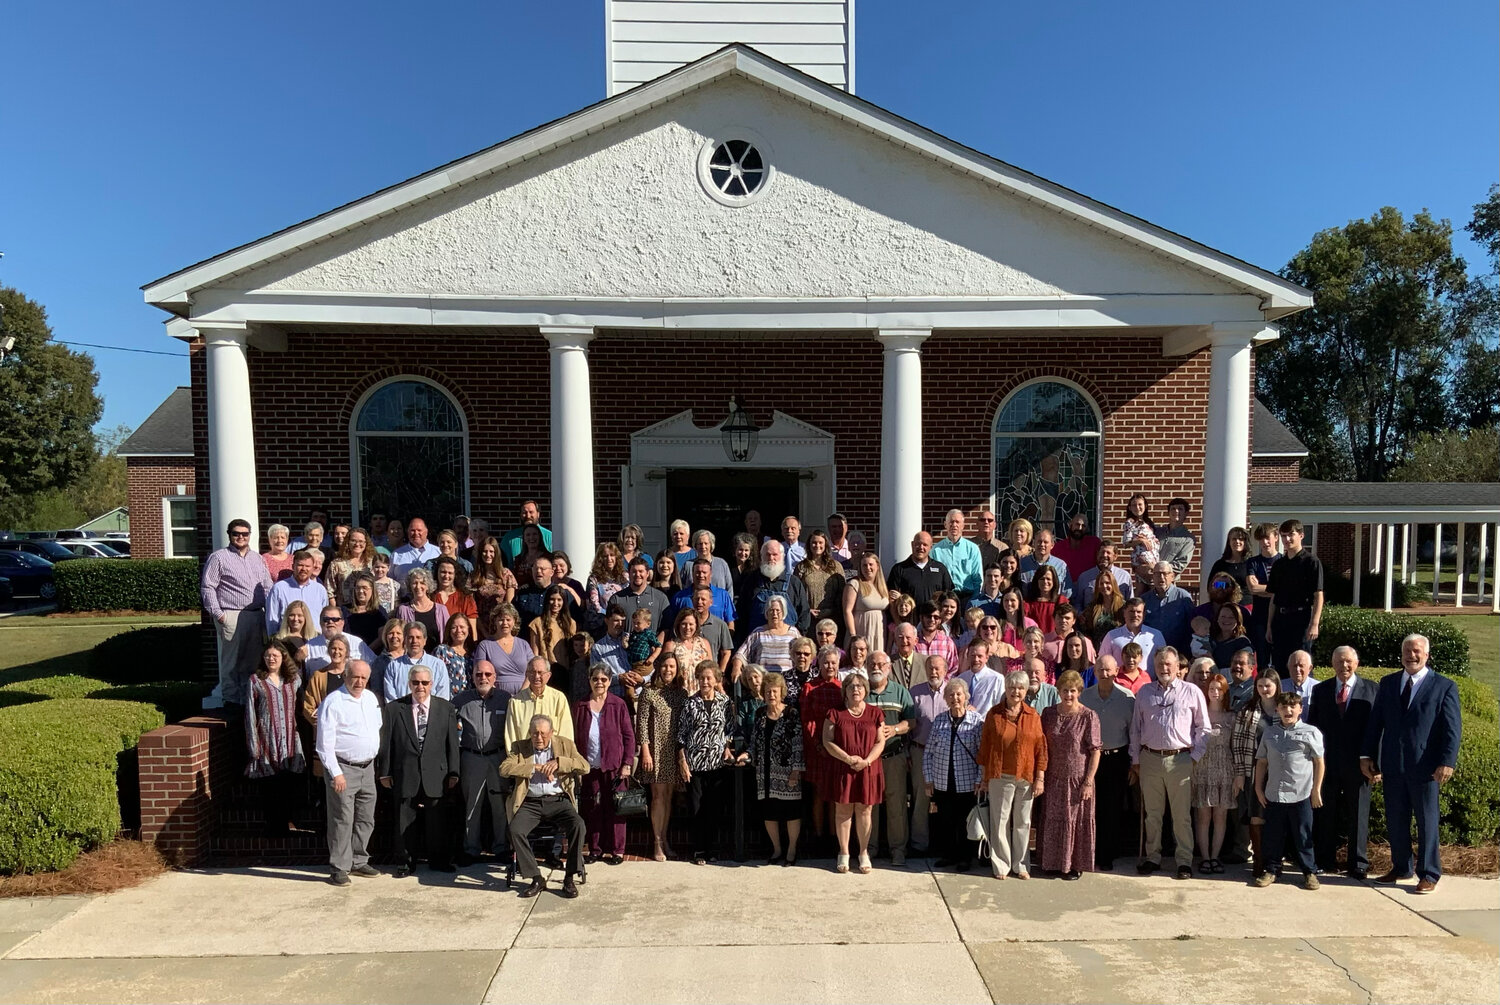 The members of Funston Baptist Church gather for a photo on the occasion of their 125th anniversary.